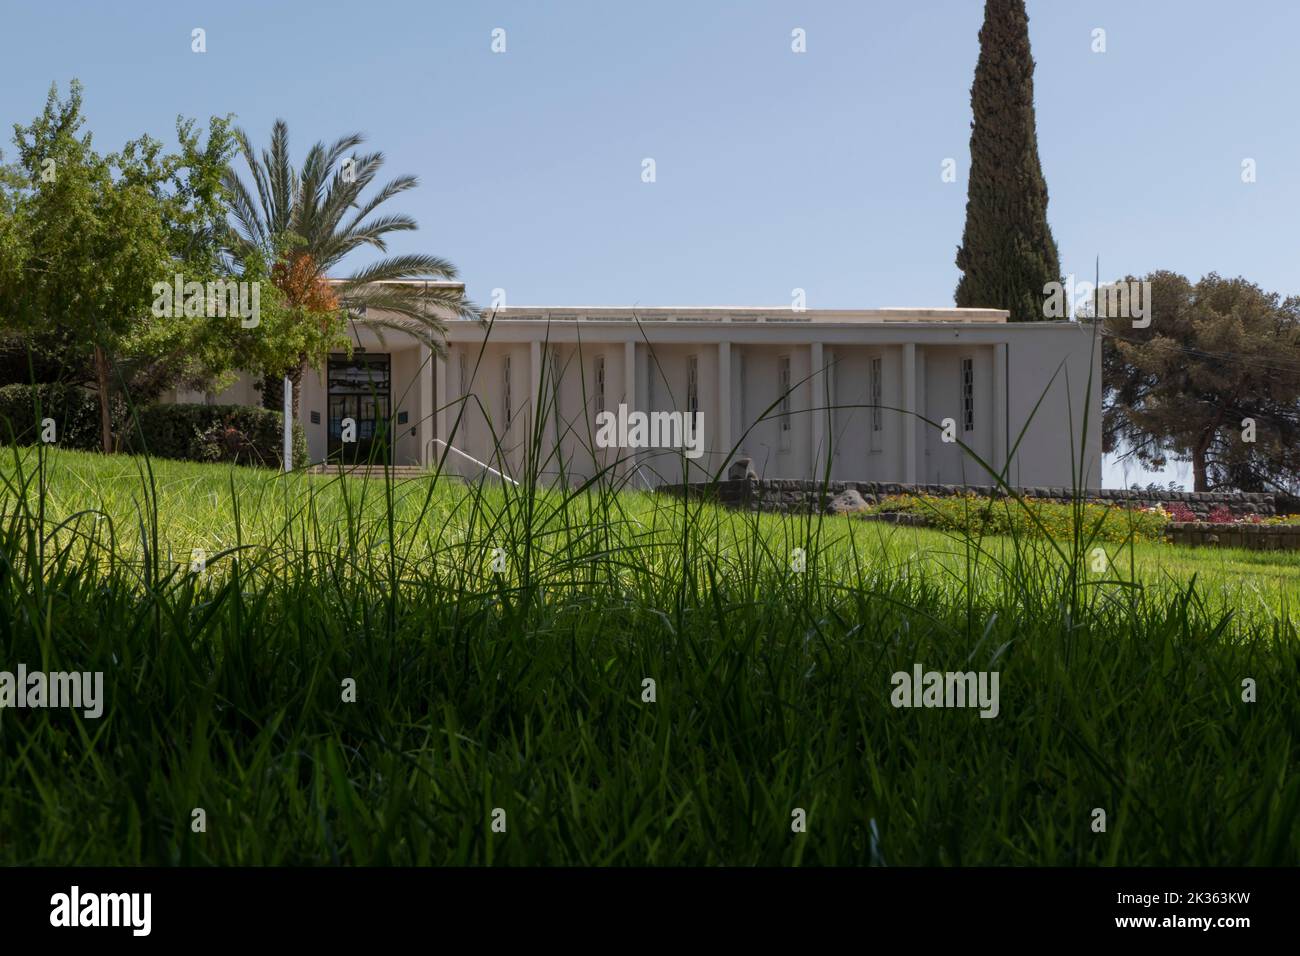 Exterior of Mishkan Museum of Art located on the grounds of Kibbutz Ein Harod Meuhad in Israel. The museum was designed by architect Samuel Bickels, inaugurated in 1948 and was the first rural museum run by a kibbutz. Stock Photo